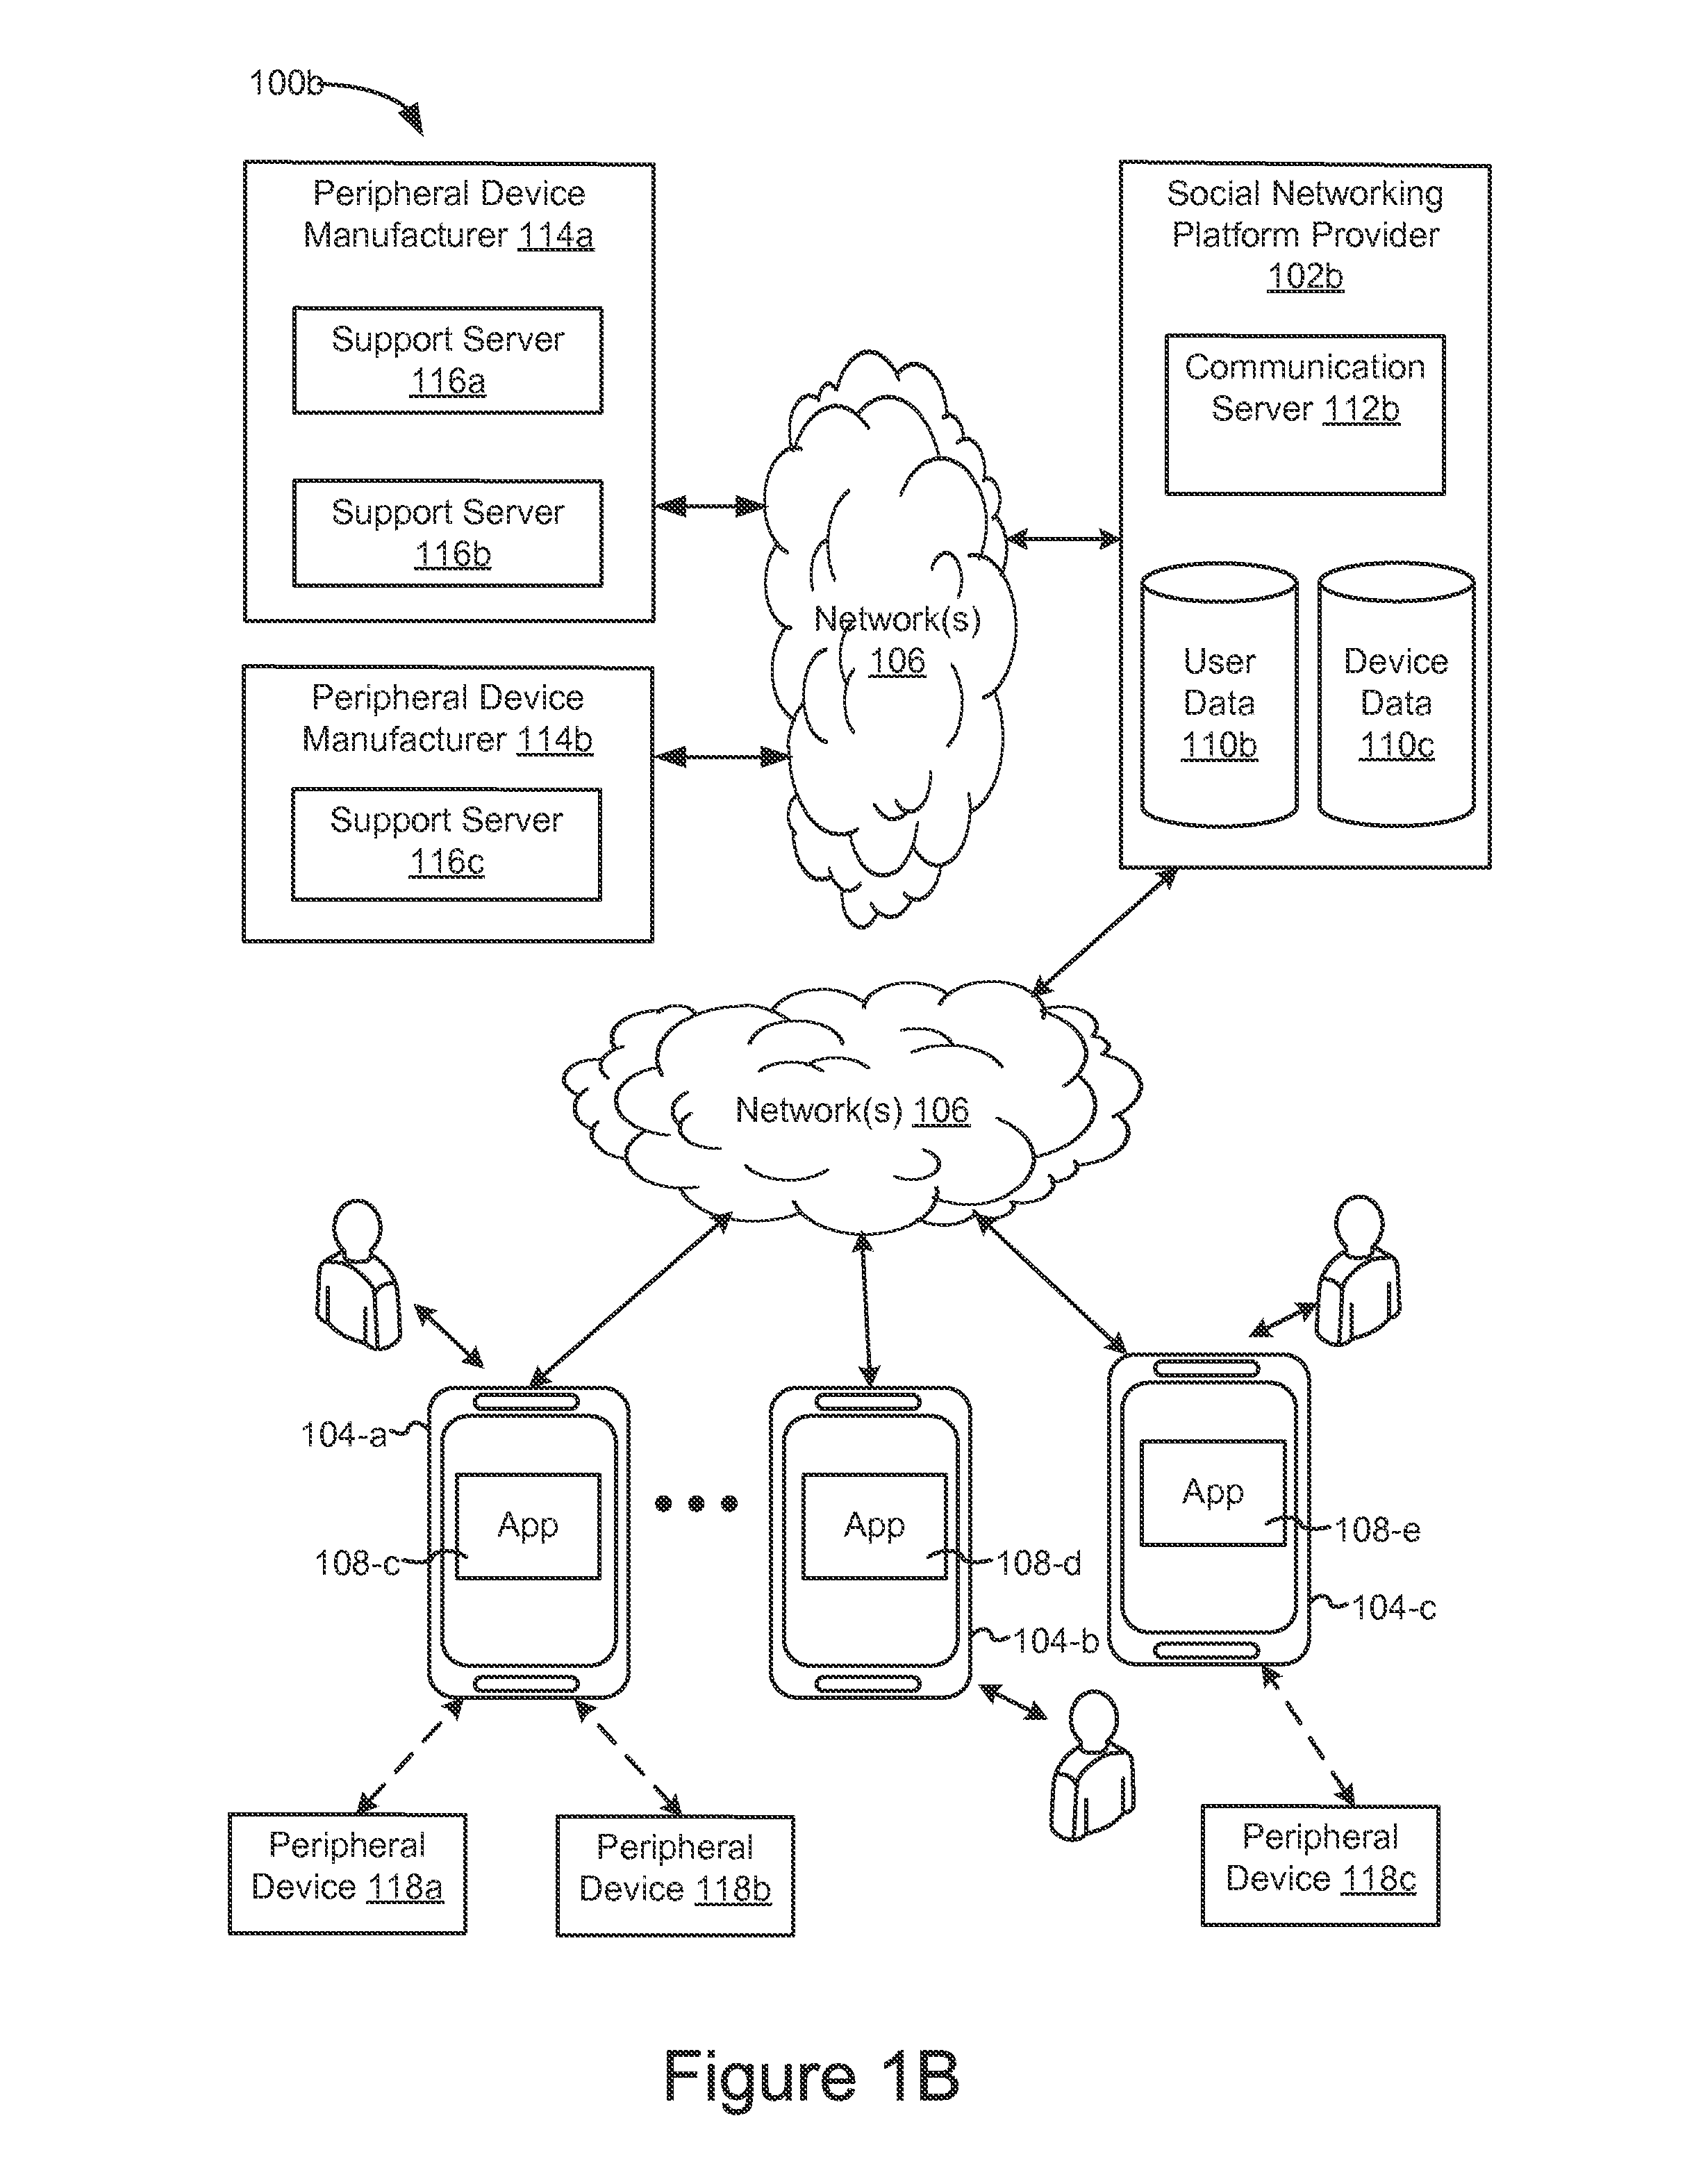 Method and device for controlling peripheral devices via a social networking platform